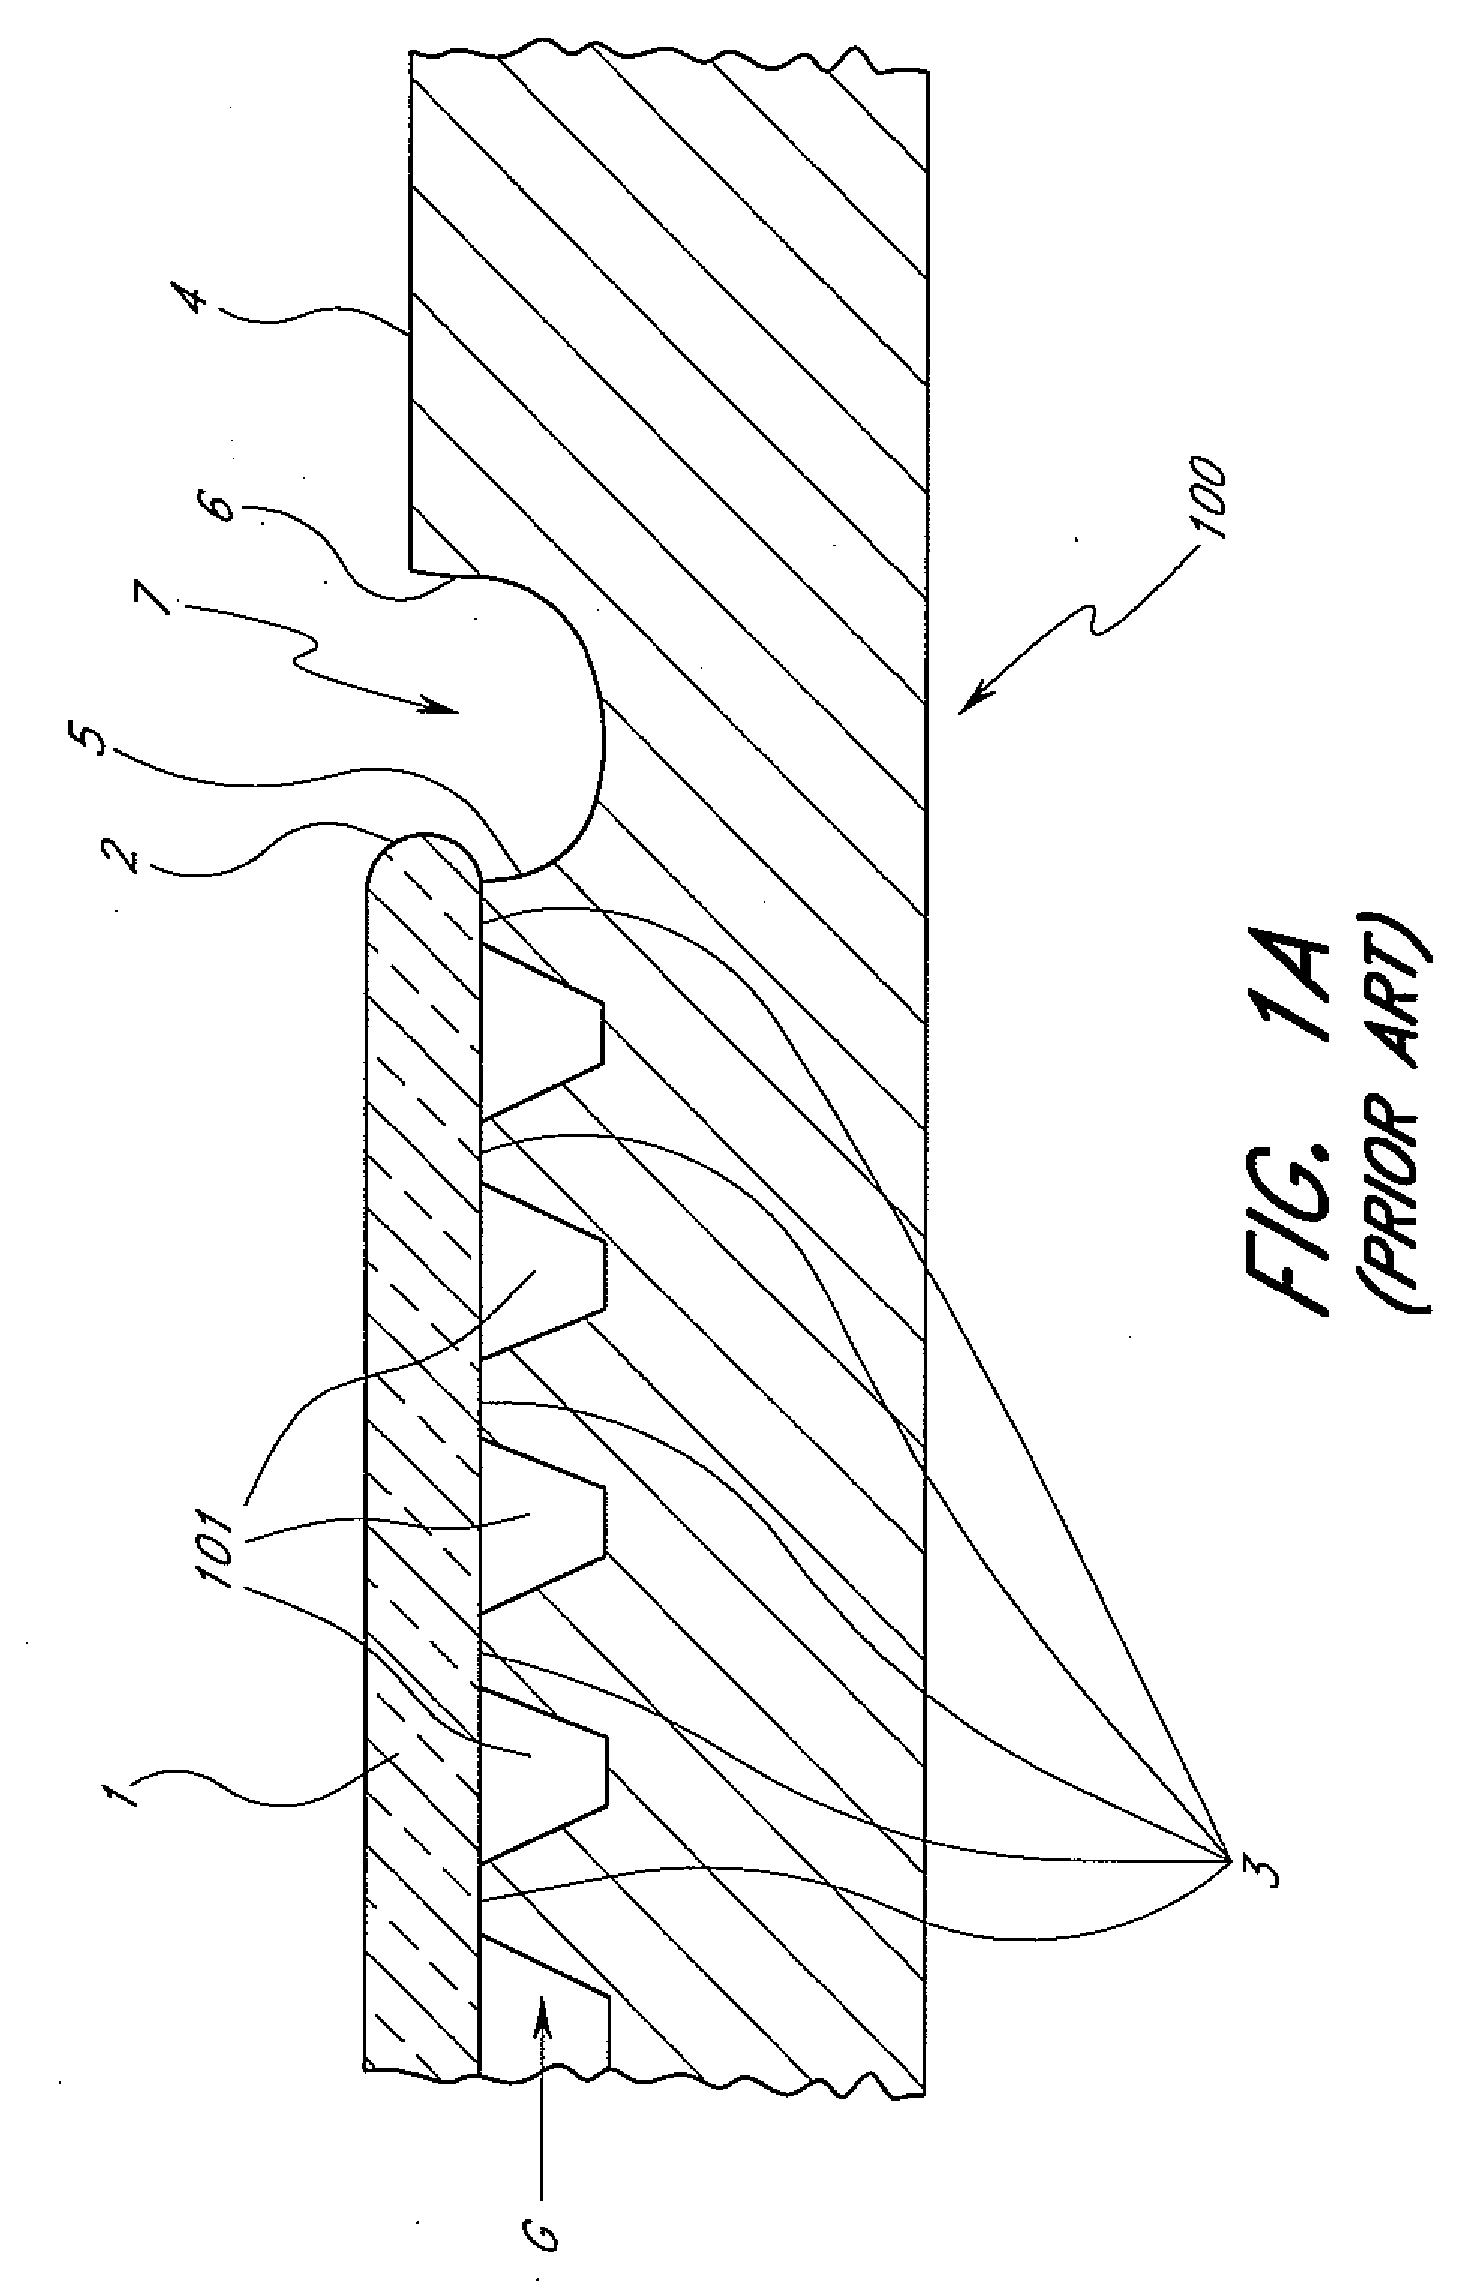 Method of supporting a substrate in a gas cushion susceptor system